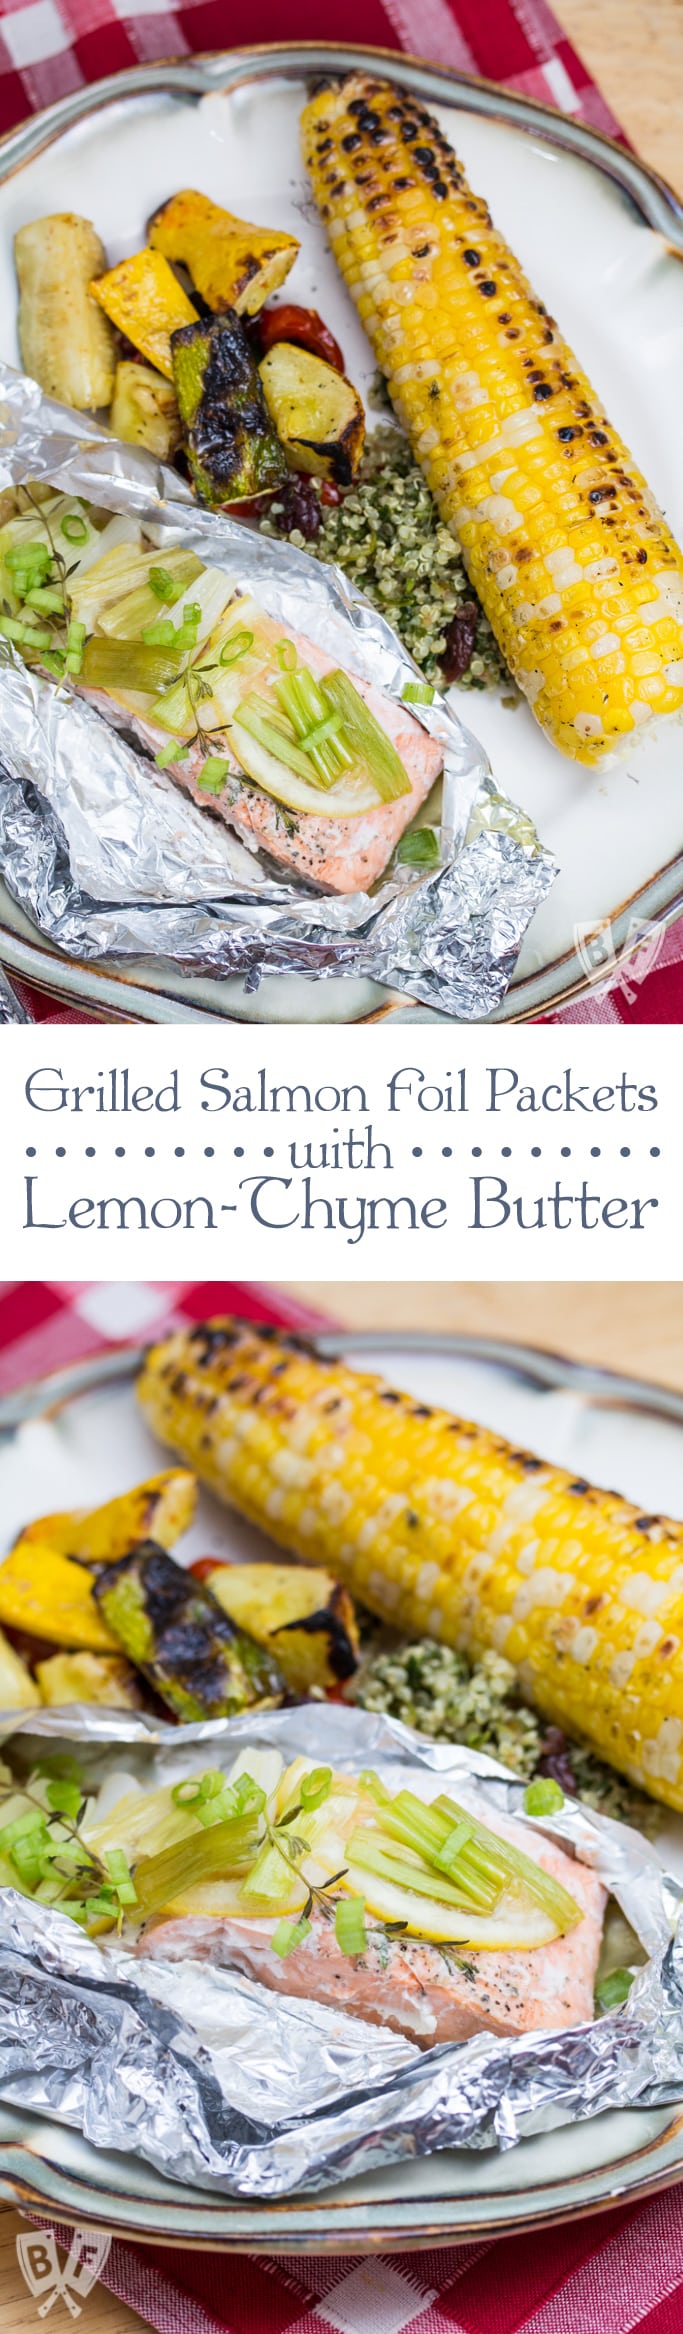 Grilled Salmon Foil Packets with Lemon-Thyme Butter: The butter melts down into the fish creating a delicious, herb-infused sauce while it cooks away on the grill.